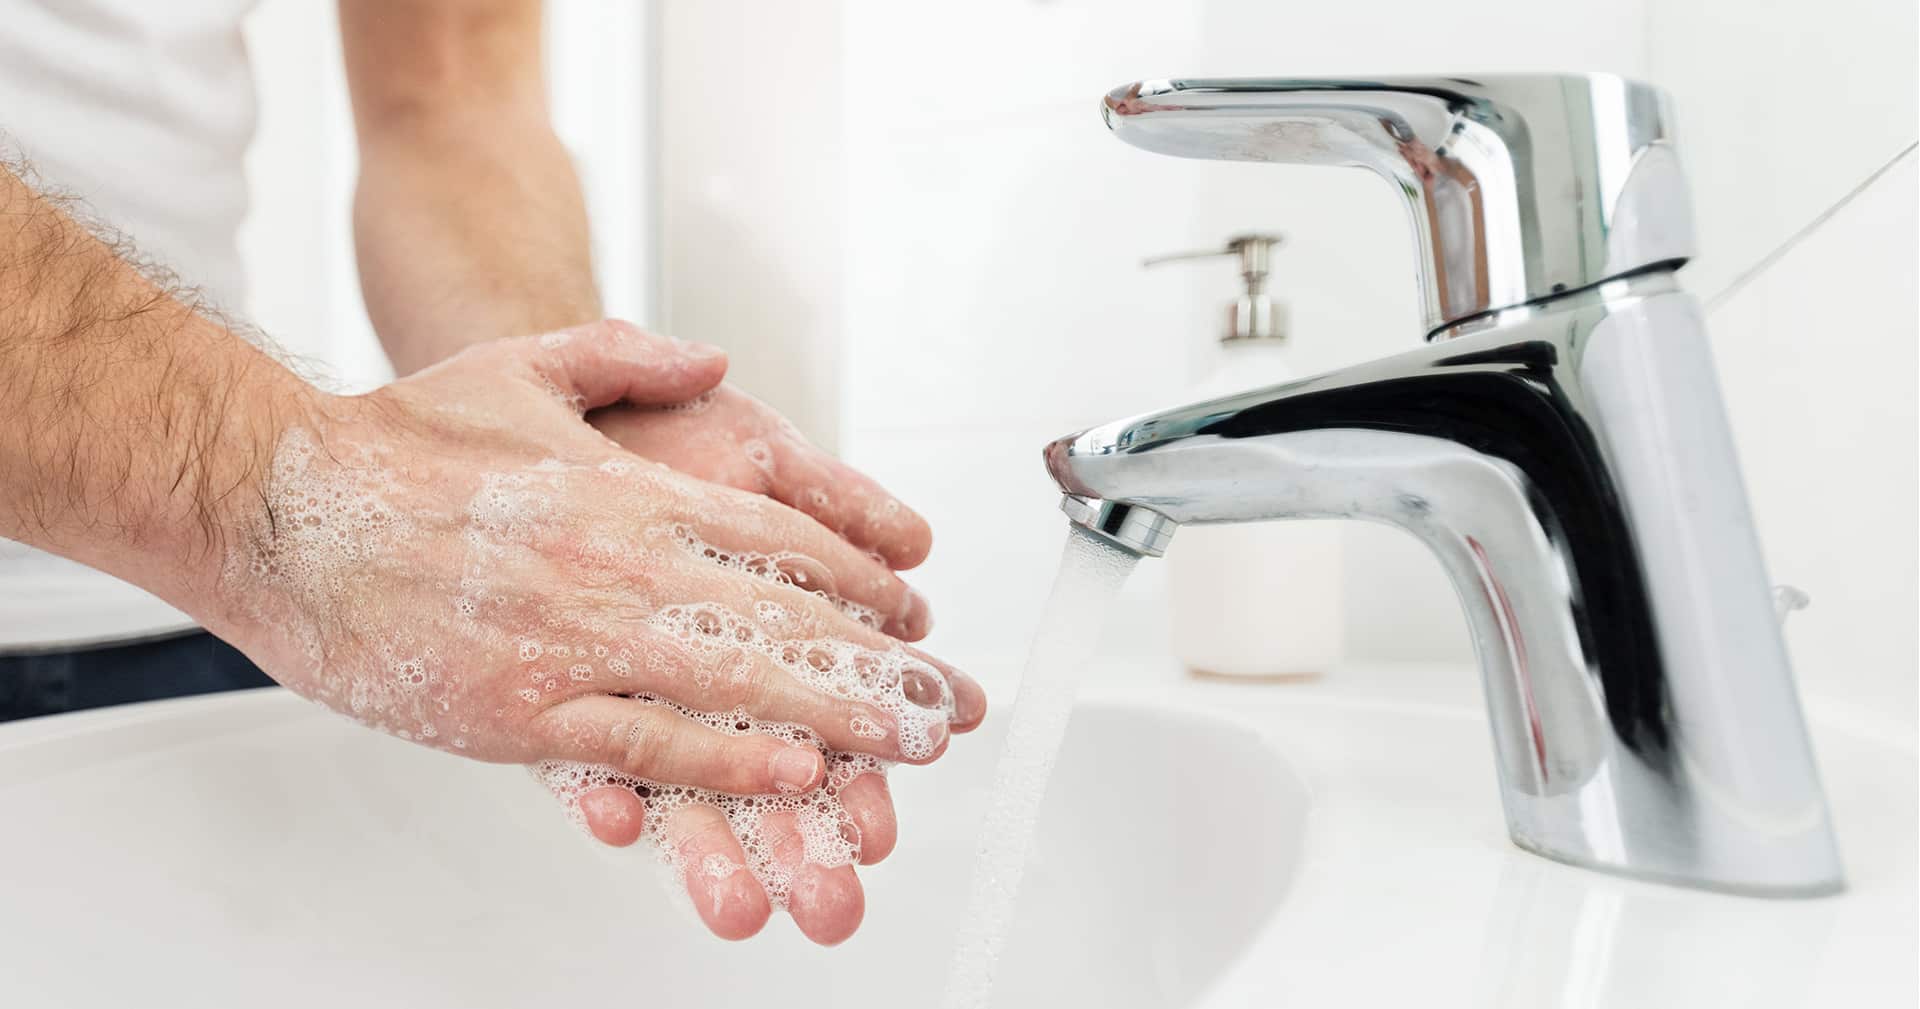 washing hands as prevention